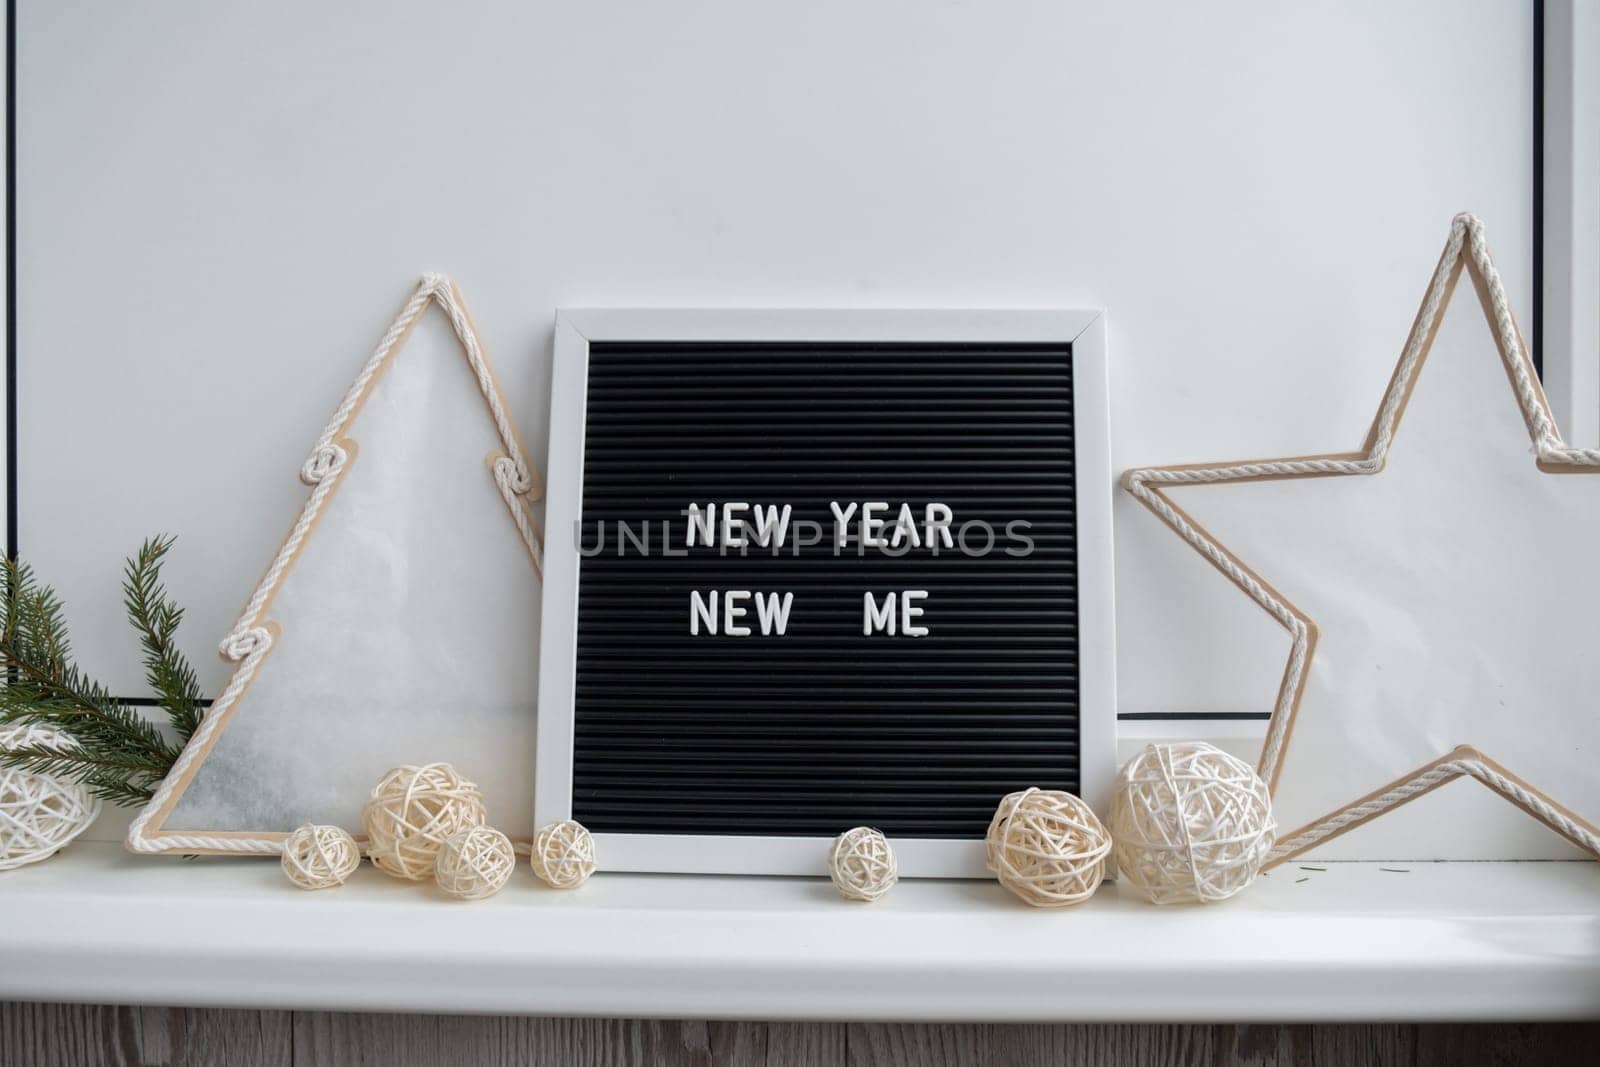 NEW YEAR NEW ME text on black letter board with cozy minimalistic handmade Christmas decor. New year aims resolutions. Low key festive Planning and setting goals by anna_stasiia